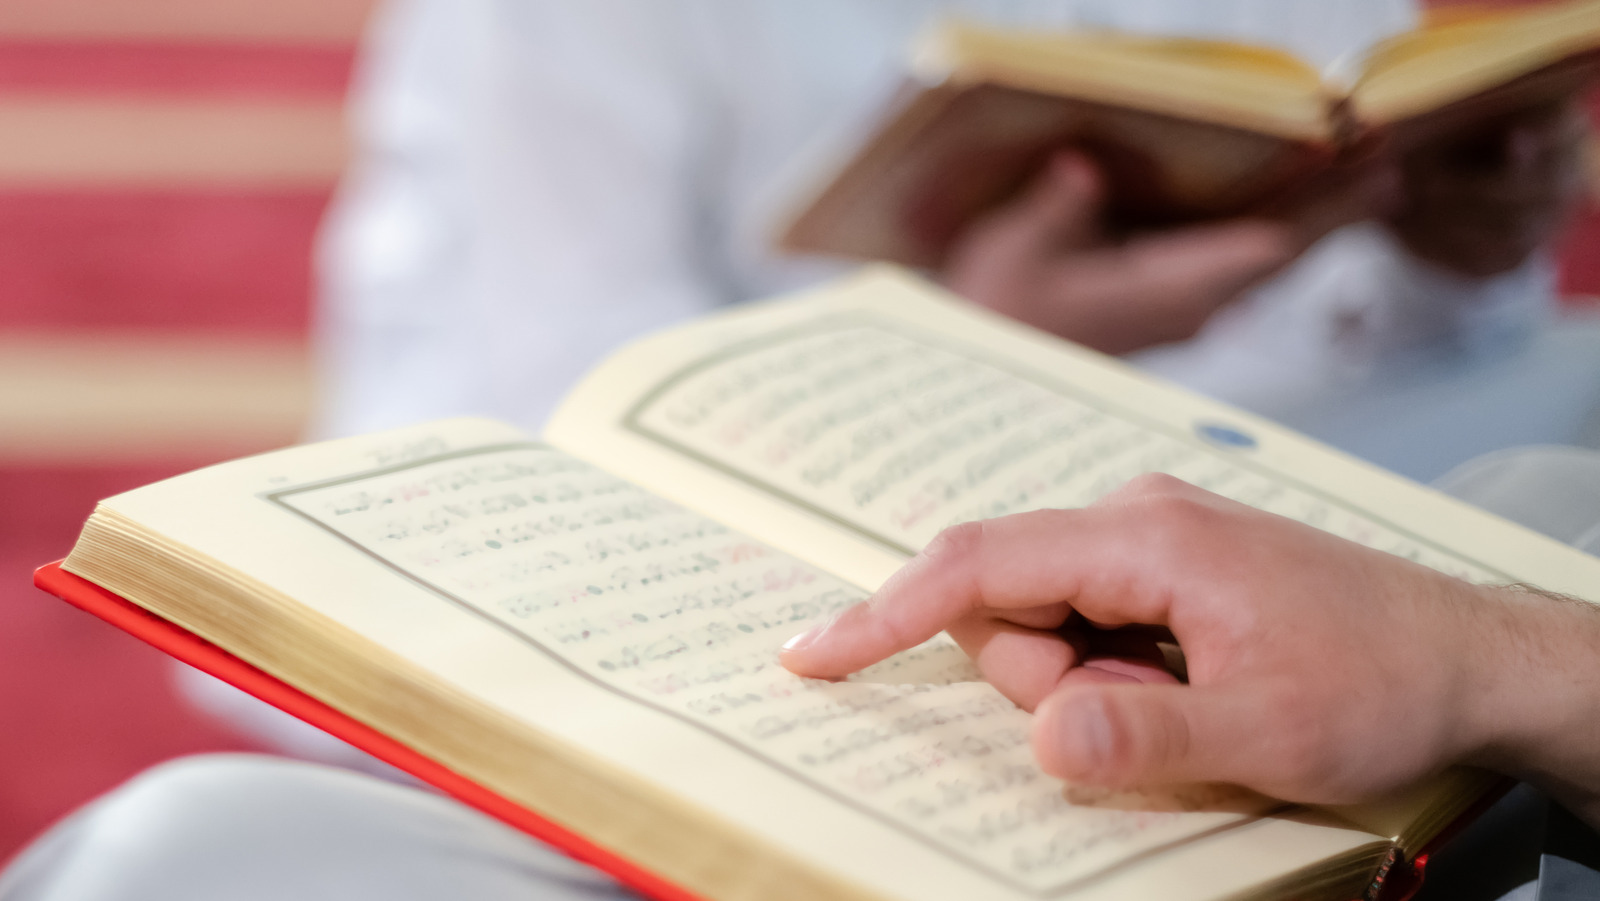 How Long Does It Take To Read The Quran?